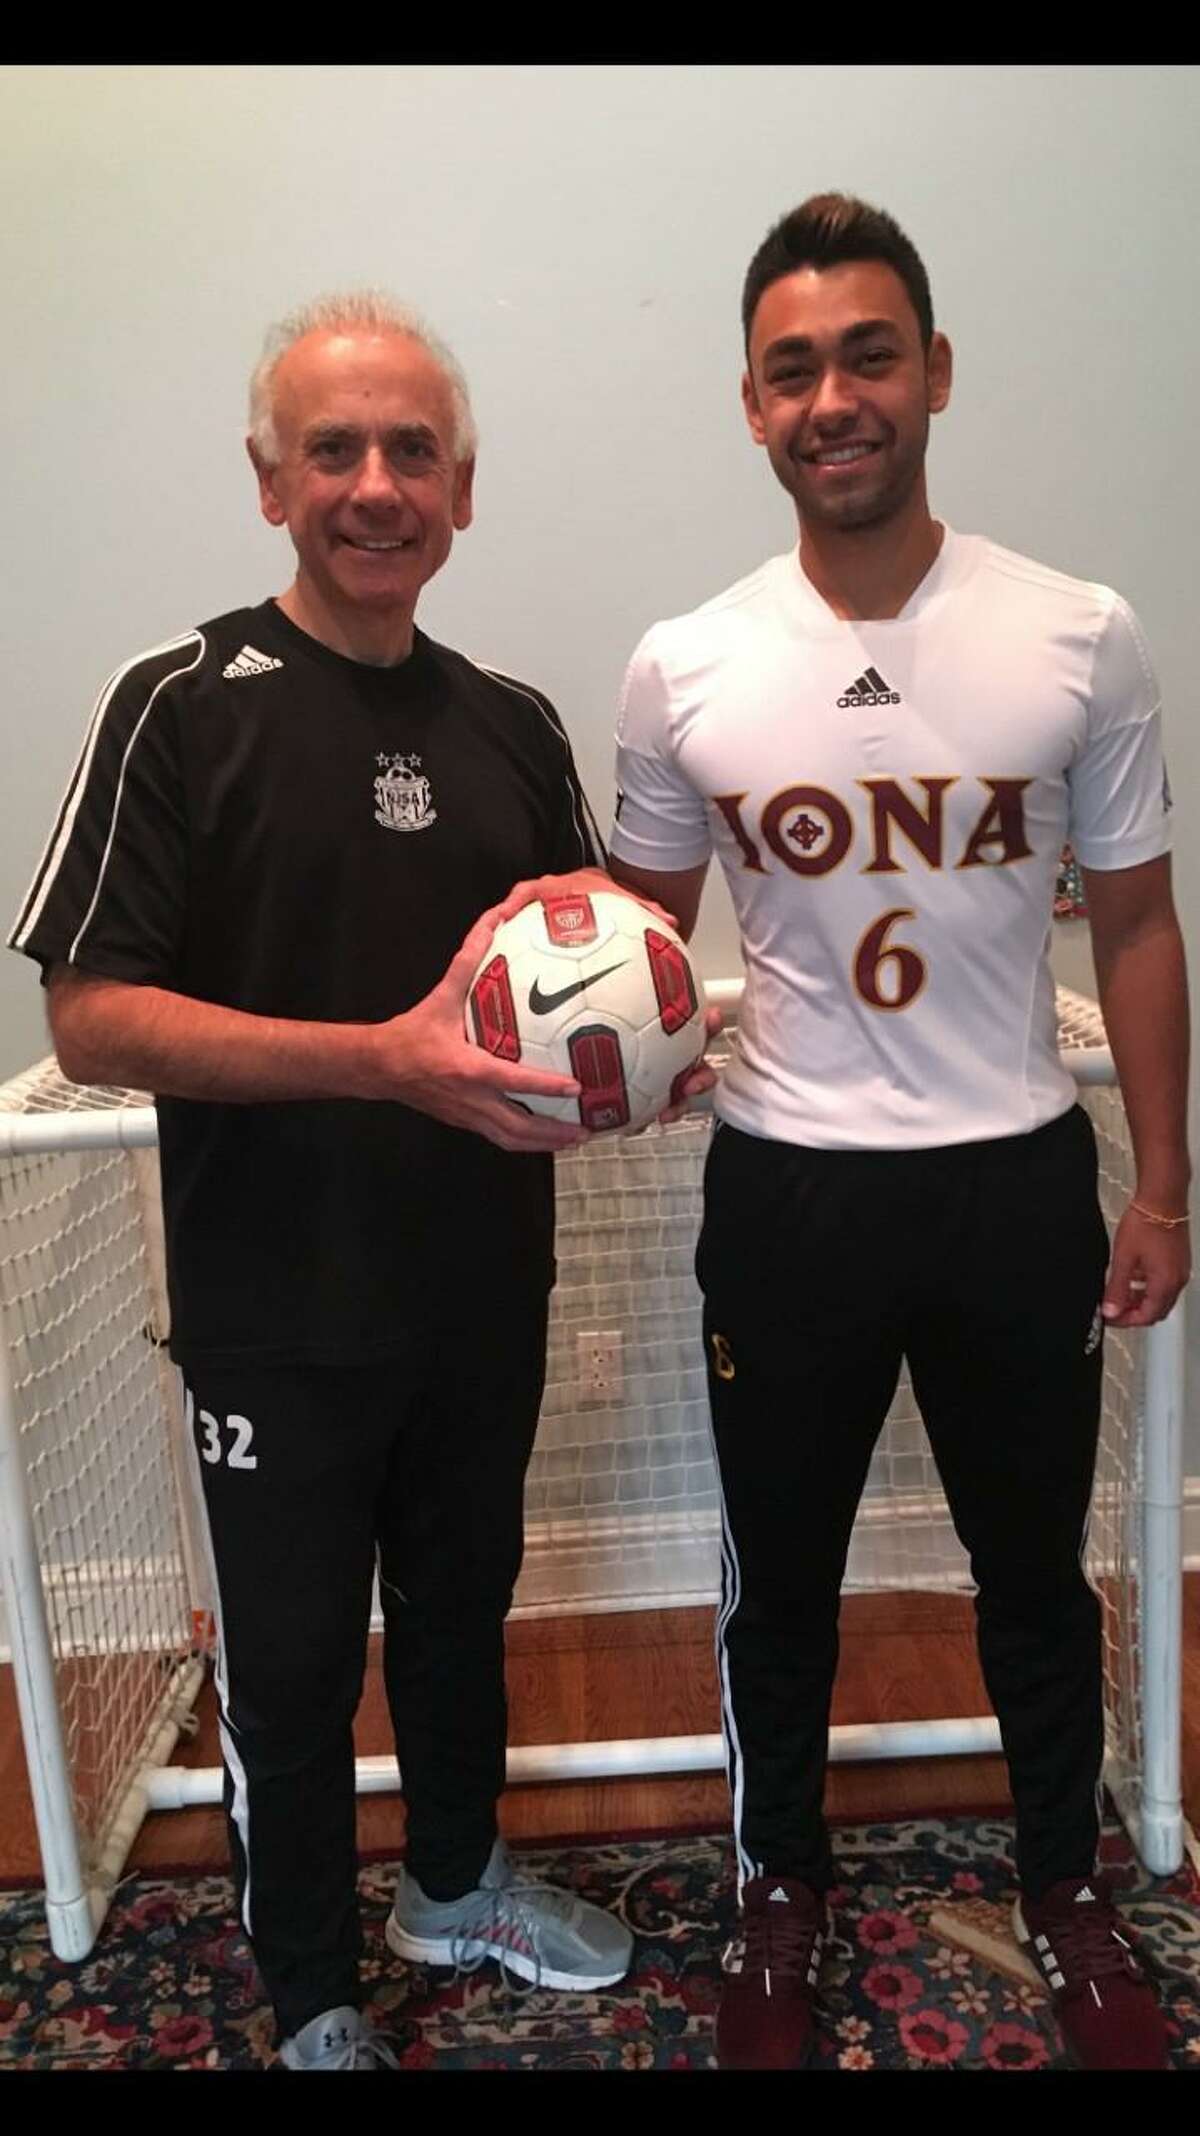 Pat Ferrandino, left, who played soccer at Brien McMahon and UConn four decades ago, poses with his son Jon-Luke Ferrandino, a former all-state player at New Canaan High and who also played at UConn before transferring to Iona College.